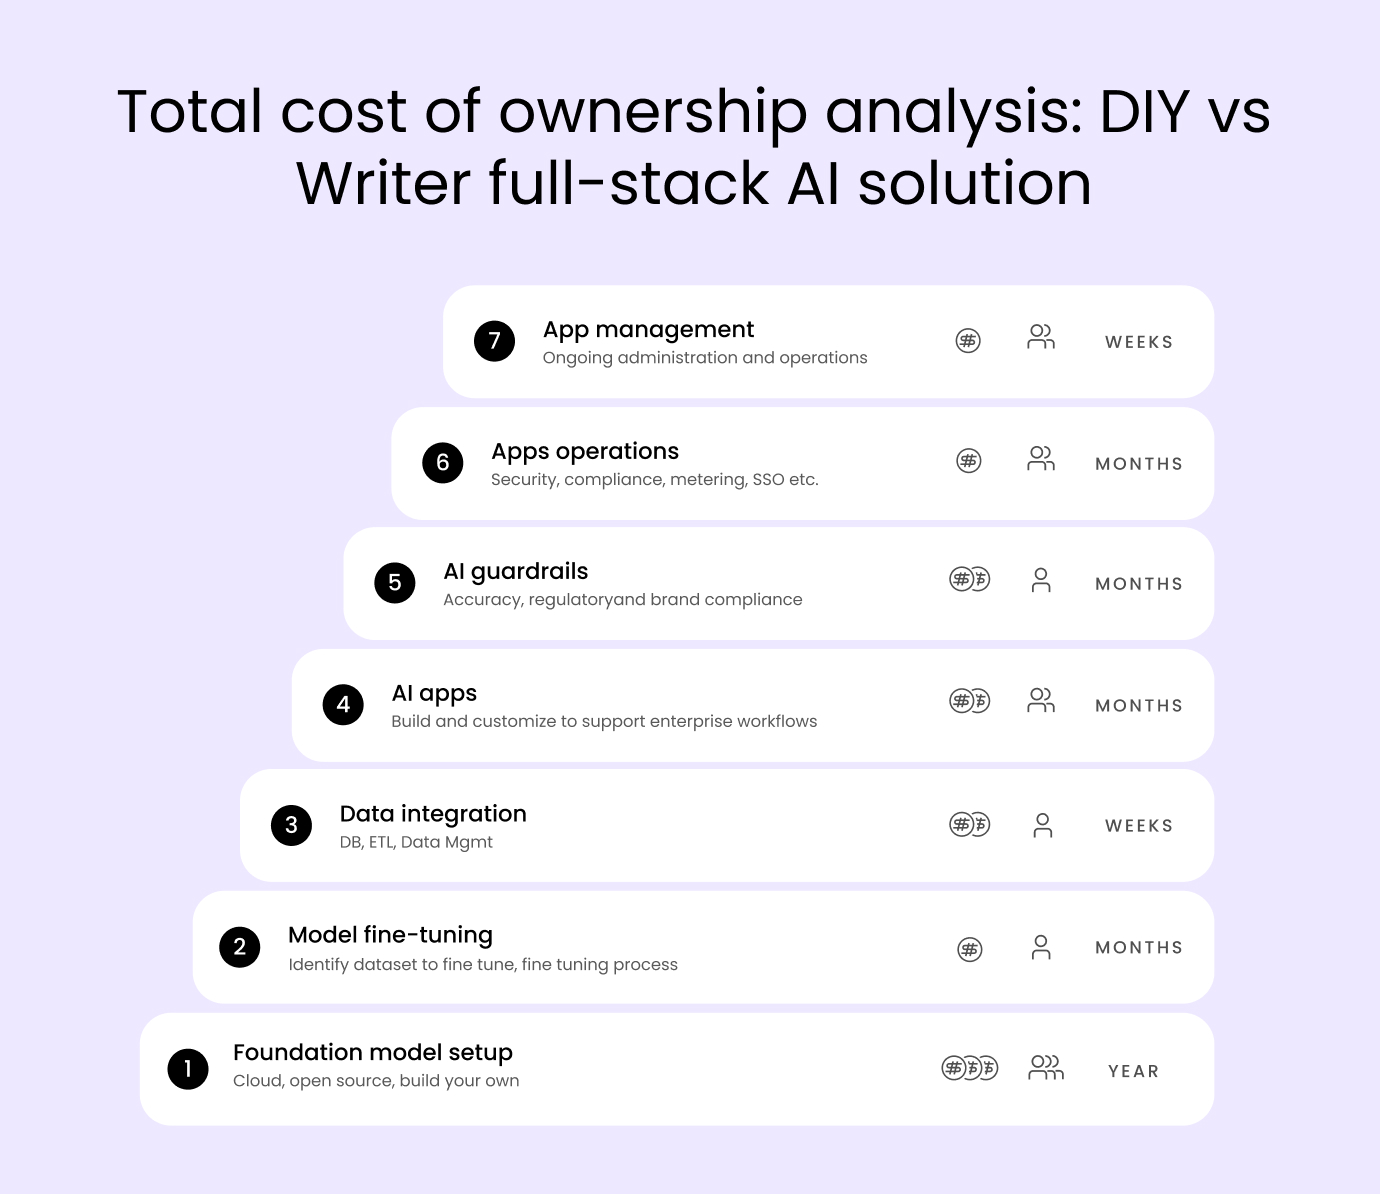 Total cost of ownership analysis: DIY vs Writer full-stack AI solution

1. Foundational model setup
2. Model fine-tuning
3. Data integration
4. AI apps
5. AI guardrails
6. Apps operations
7. App management